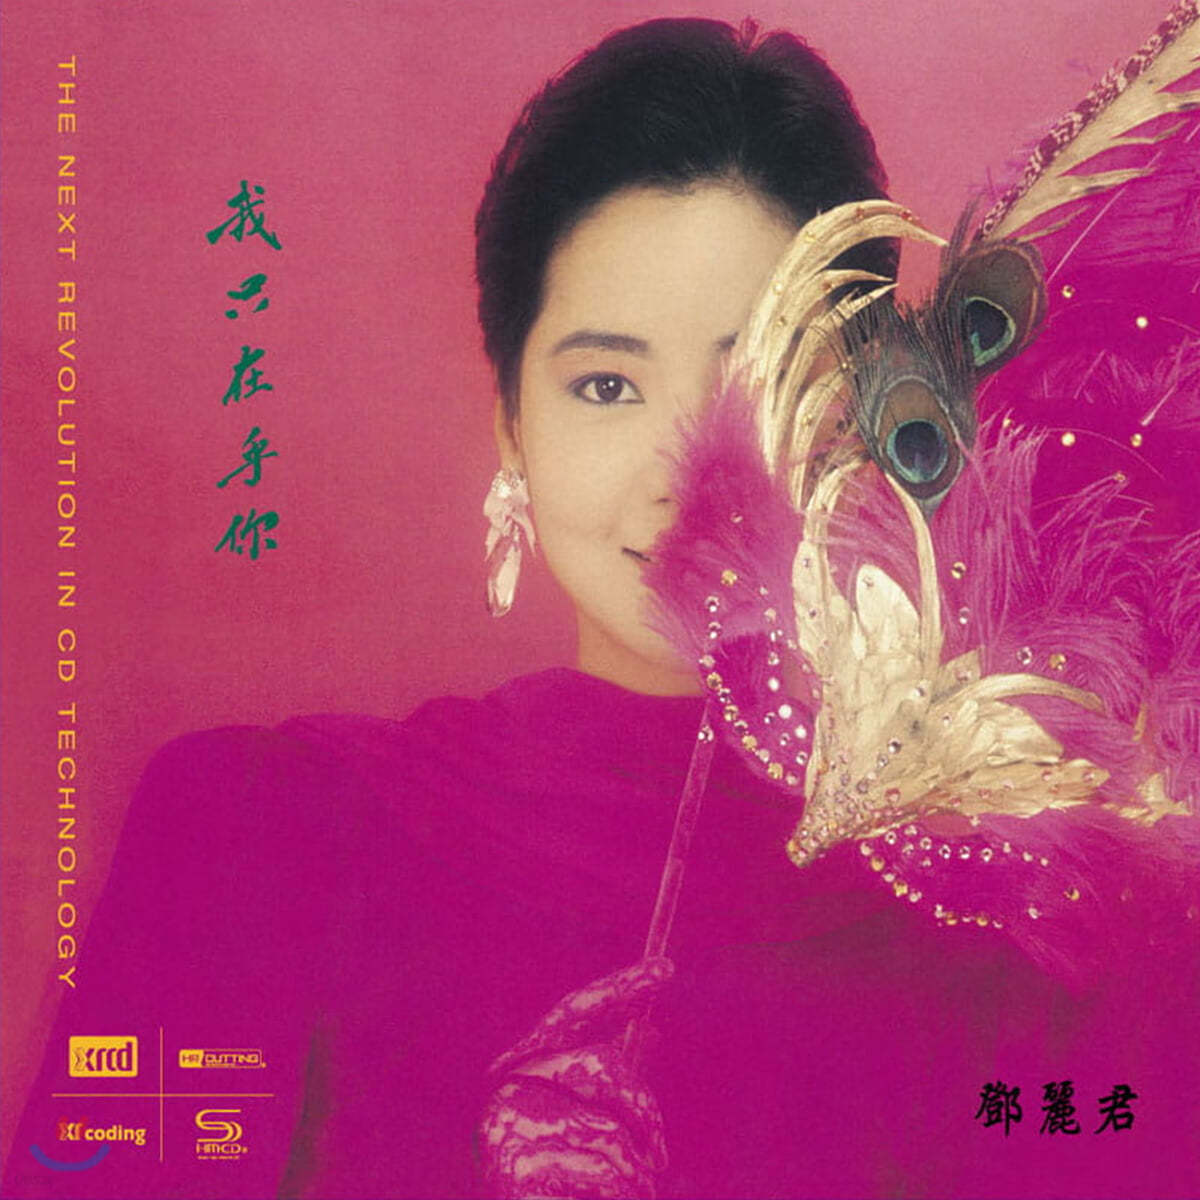 Teresa Teng (등려군) - I Only Care About You